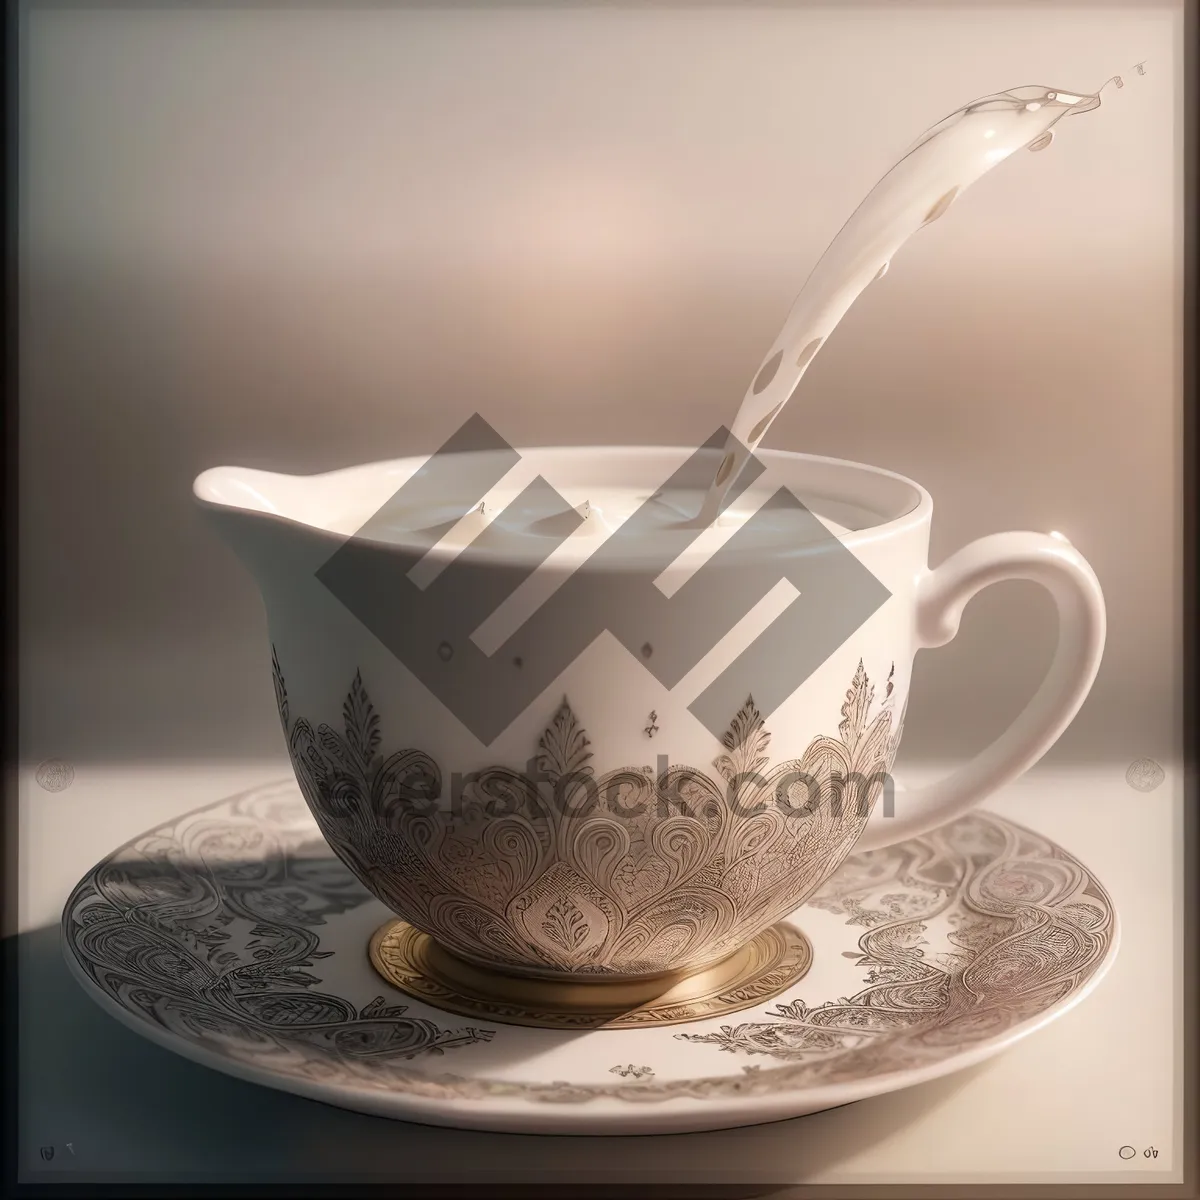 Picture of Brewing Morning Delight: Cup of Hot Tea with Saucer